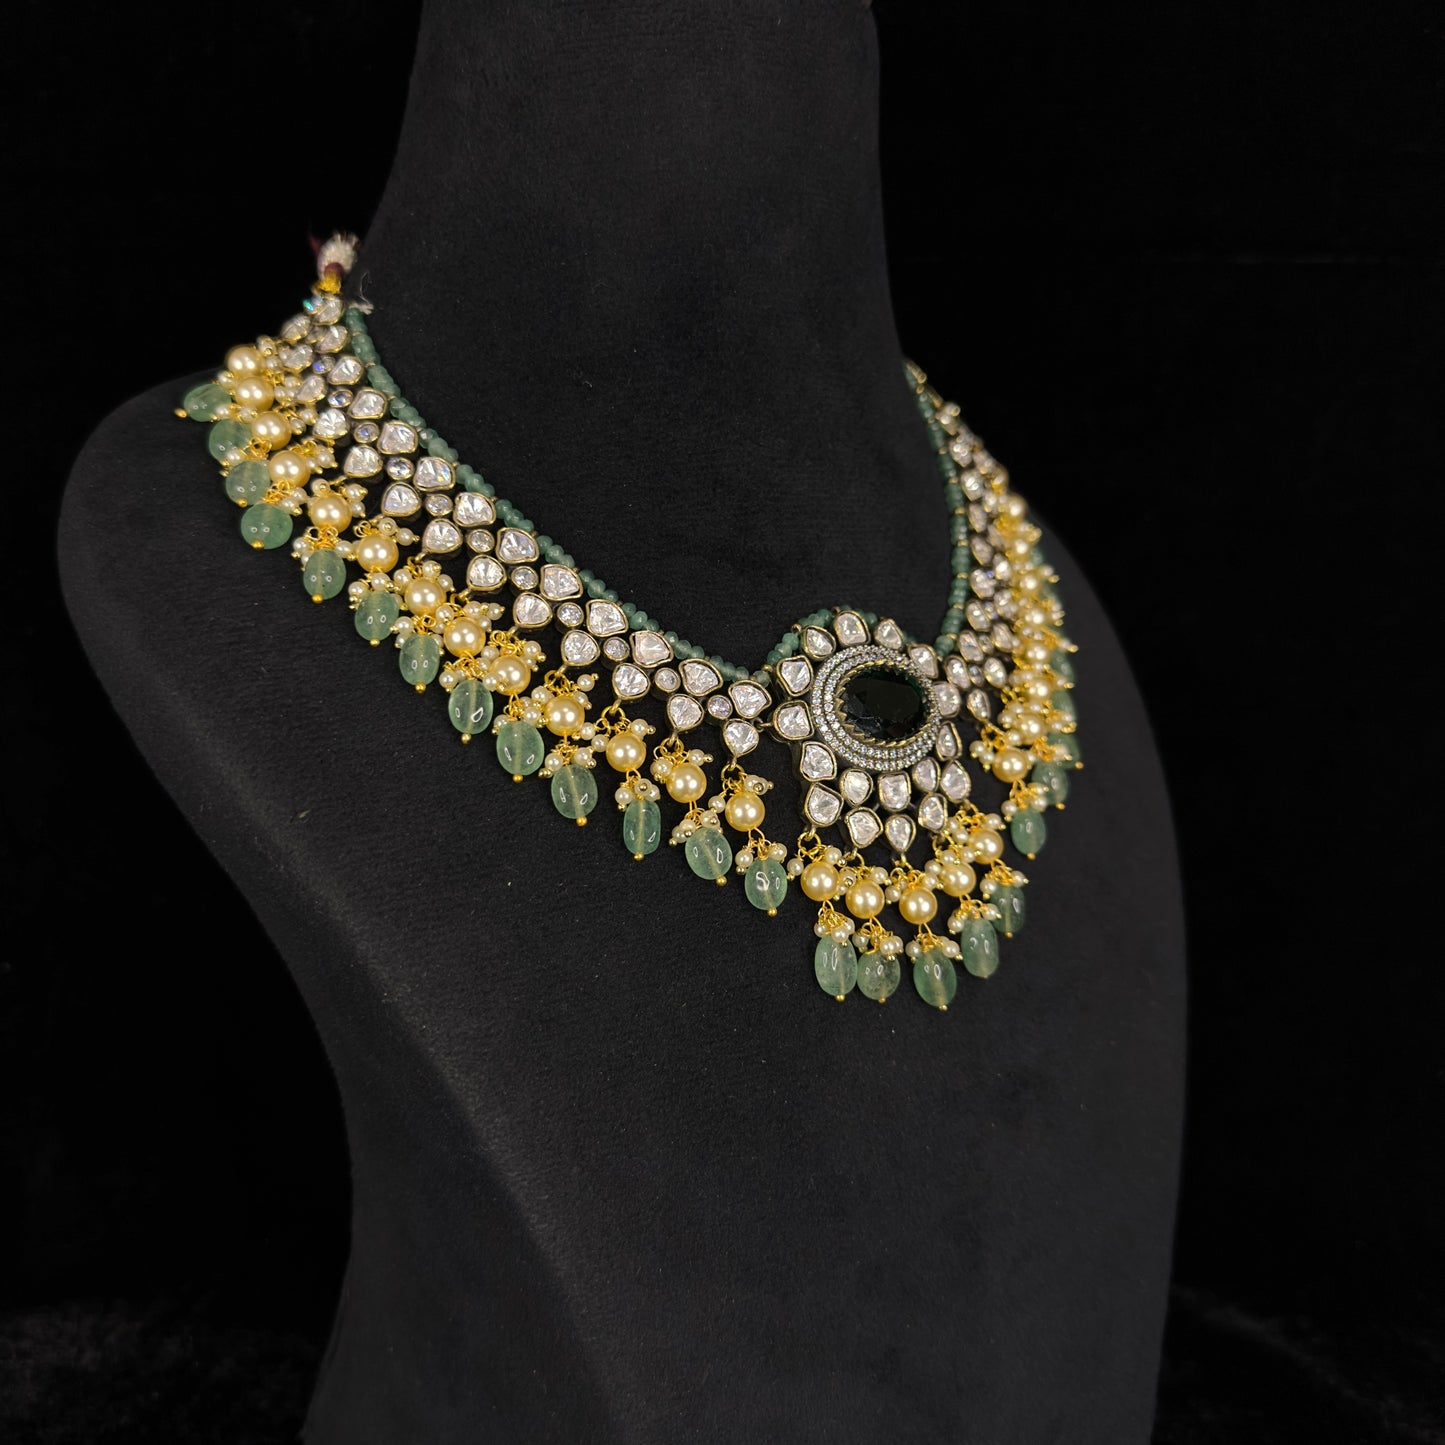 Classic Victorian Beads & Pearls Necklace Set